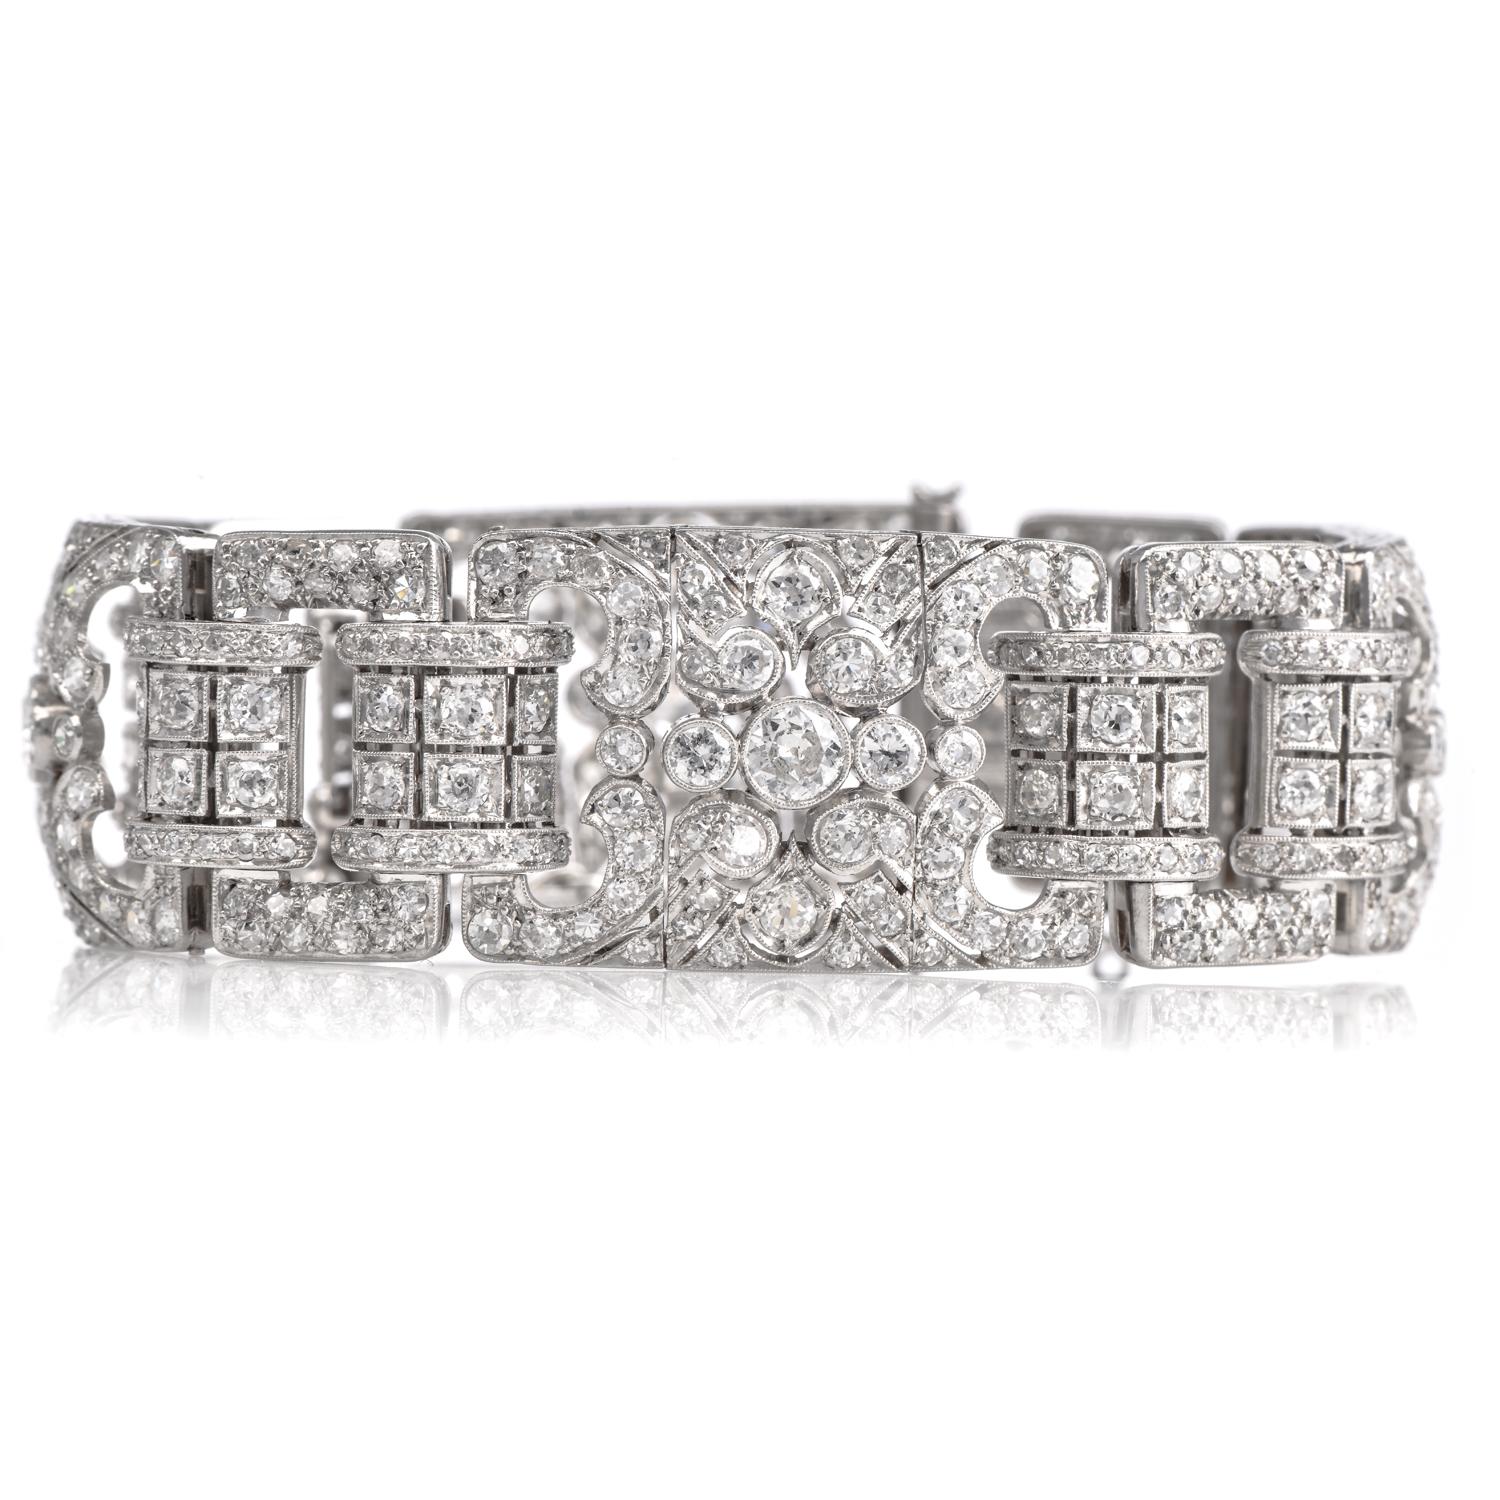 Natural Diamond Bracelet in Platinum with Migrain Work. Natural earth-mined Diamonds are in round cuts with great brilliance and weigh approximately 16.30 carats total prong set in a beautiful floral symmetry showcasing exquisite craftsmanship.

The